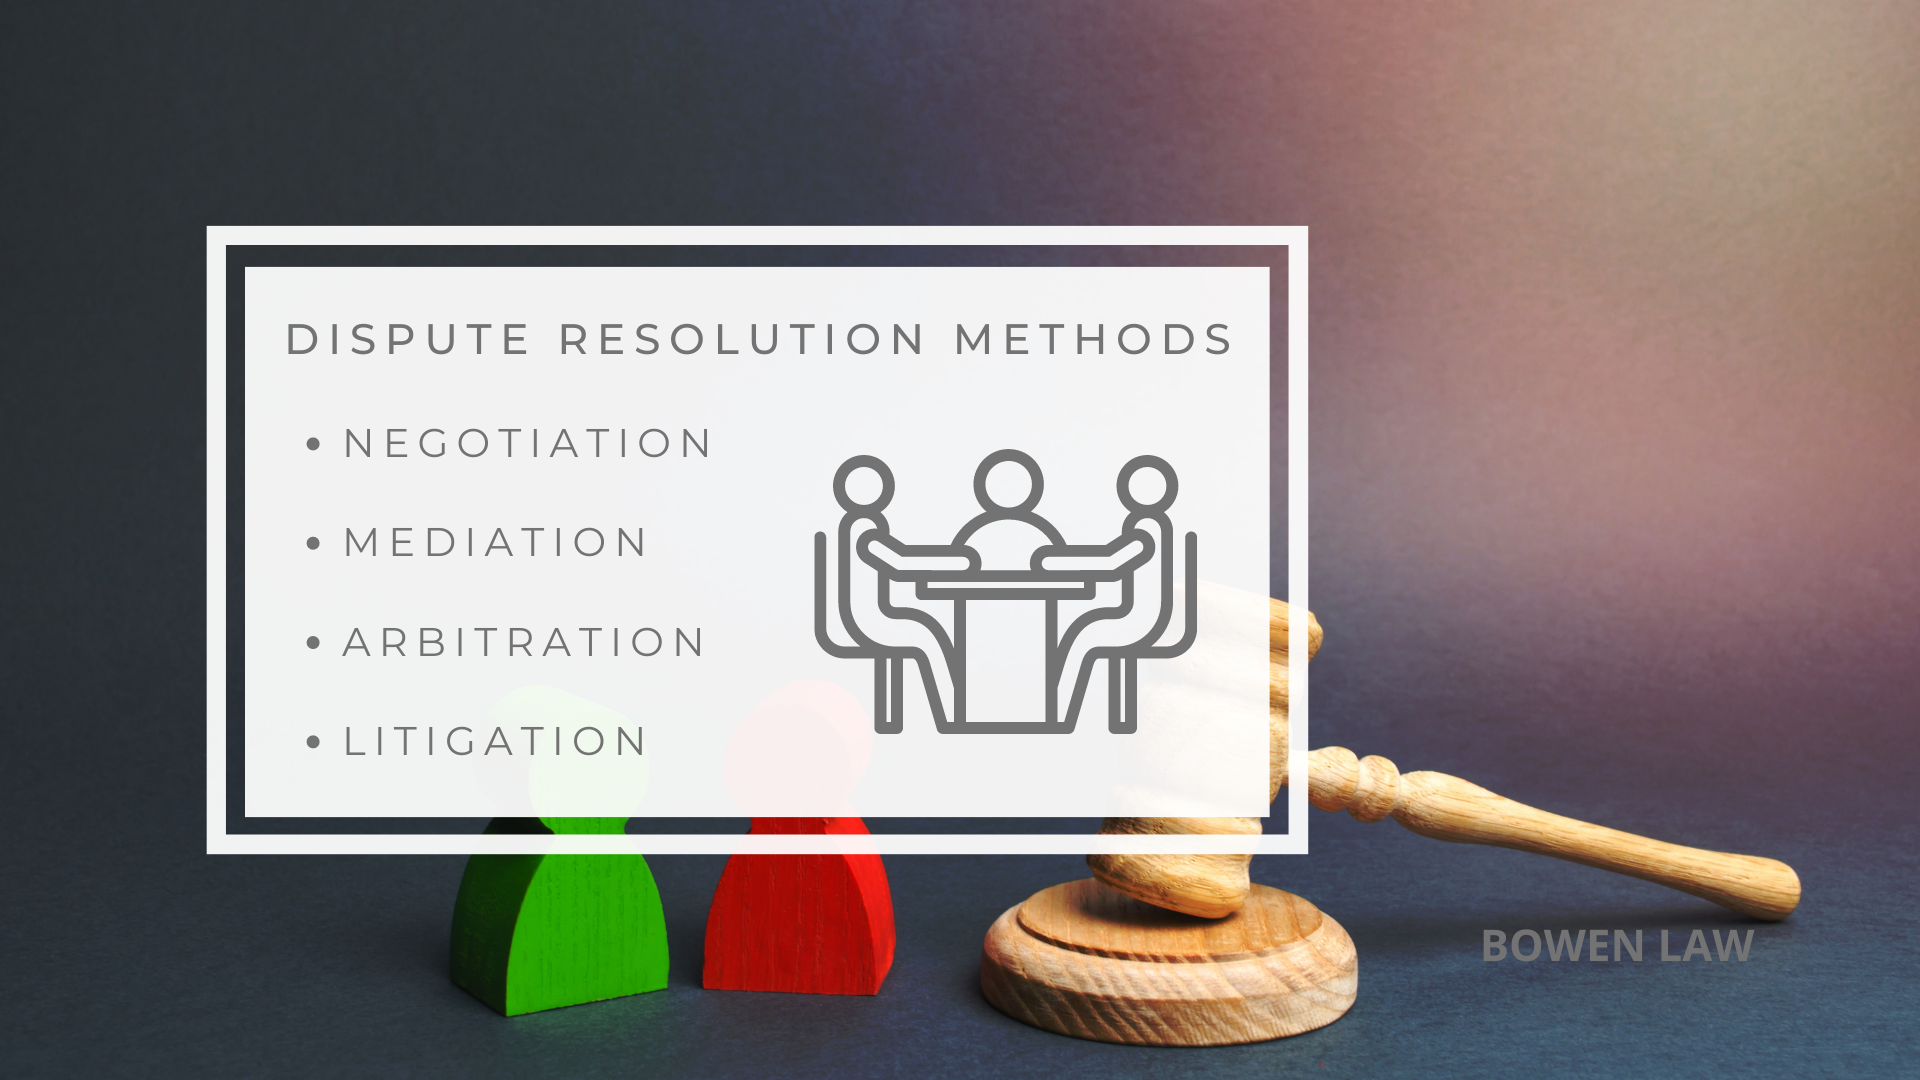 Featured image of dispute resolution methods